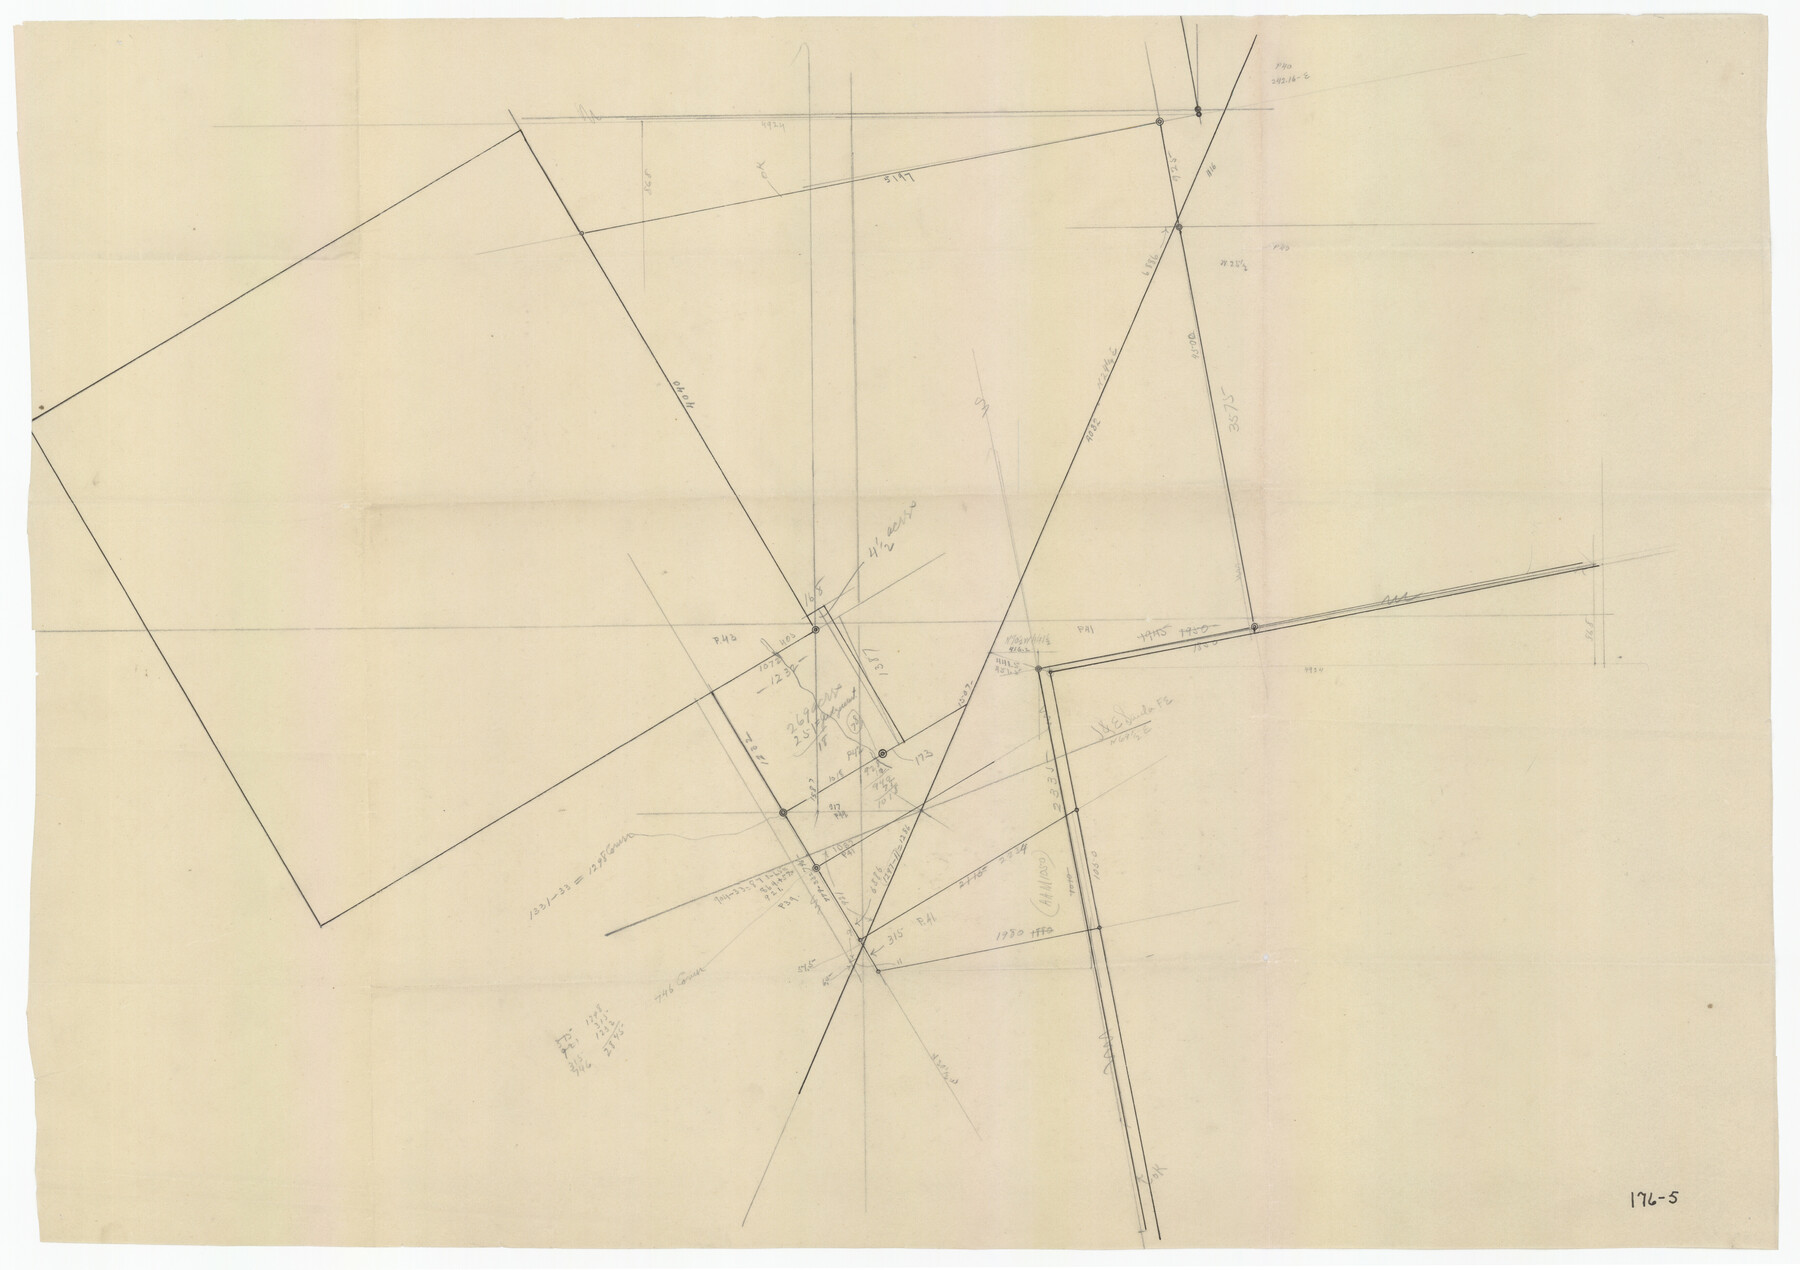 91494, [Nathaniel H. Cochran Survey and Vicinity], Twichell Survey Records